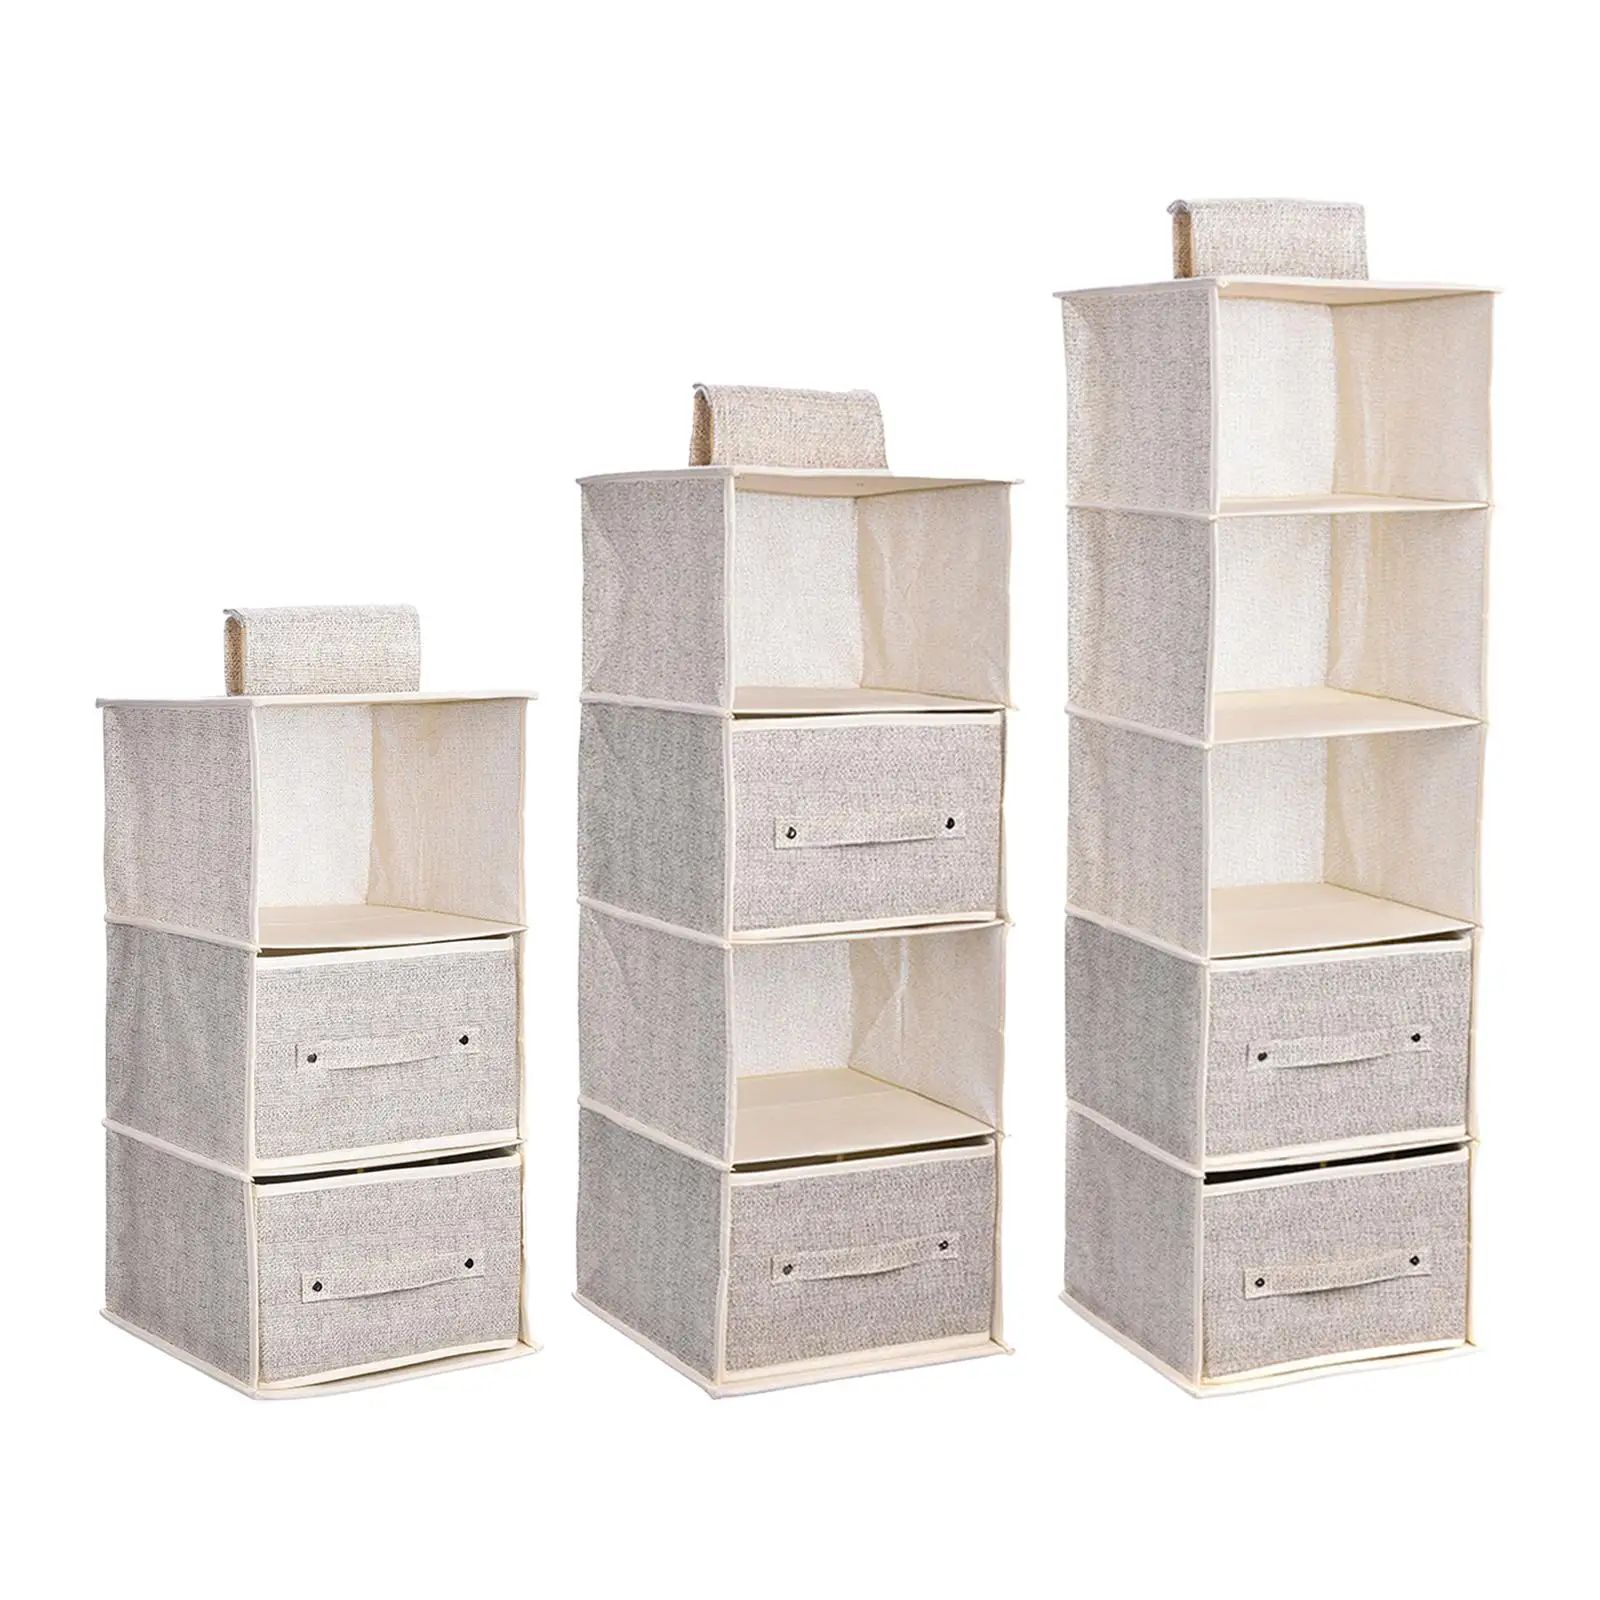 Hanging Closet Organizer with Drawers Waterproof Dorm Clothes Storage Shelves Unit for Small Items Pants Underwear Handbags Hats